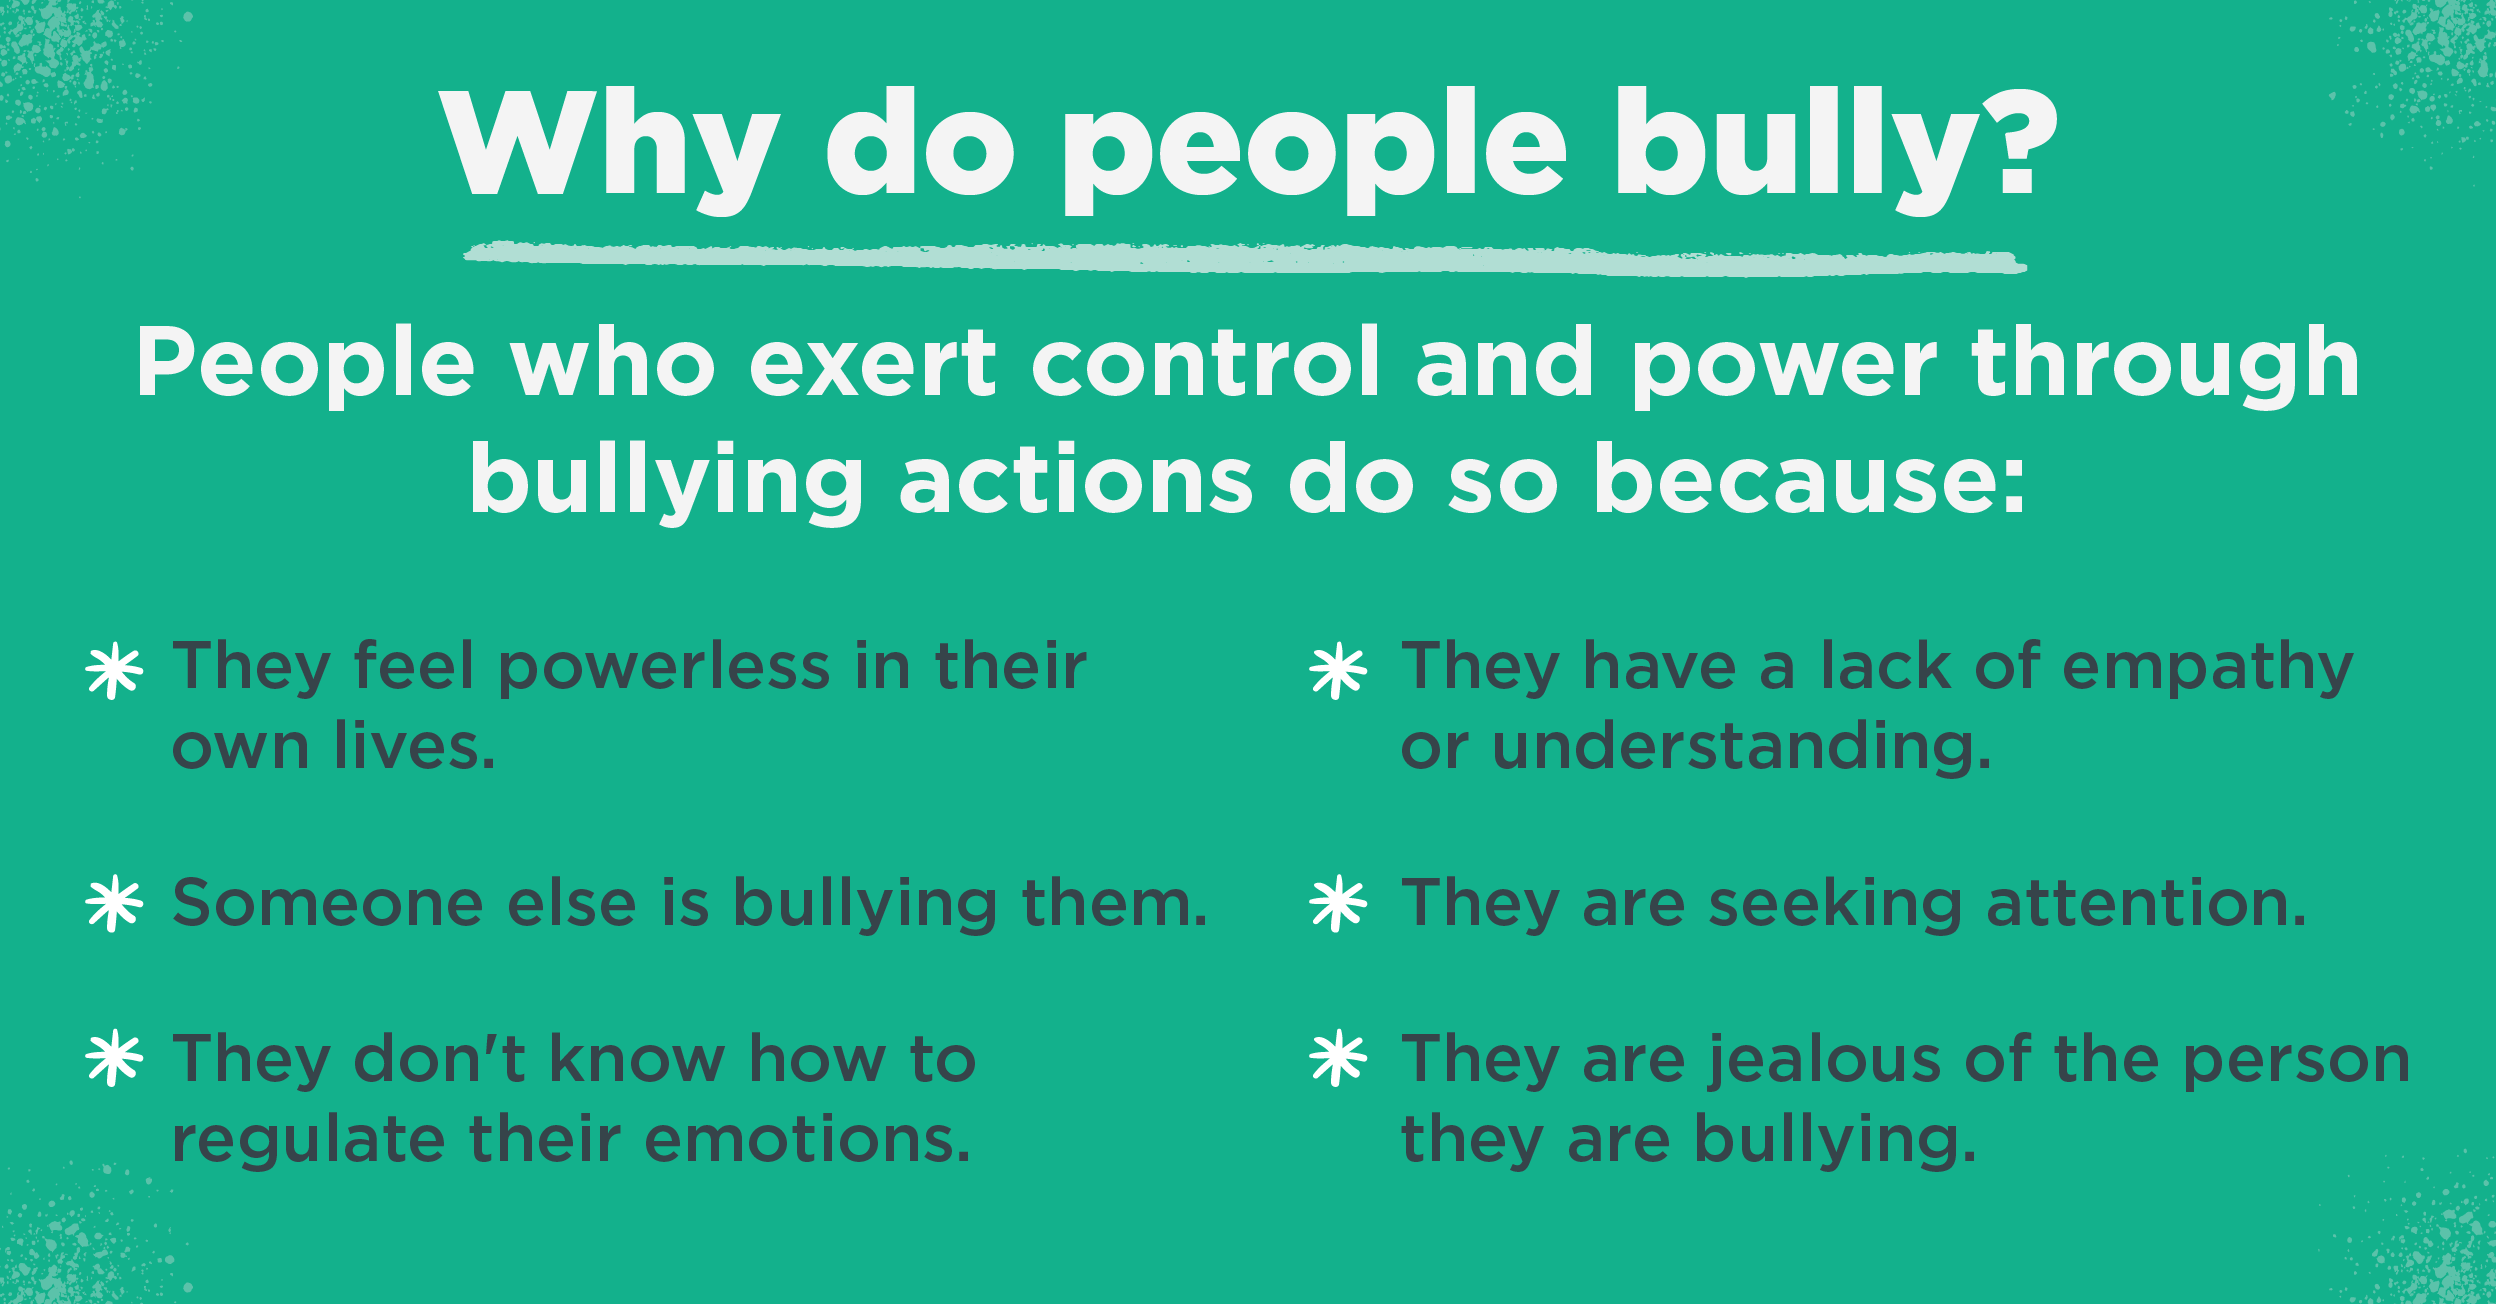 Knowing why people bully can help peers, teachers, parents and other adults know how to prevent bullying.